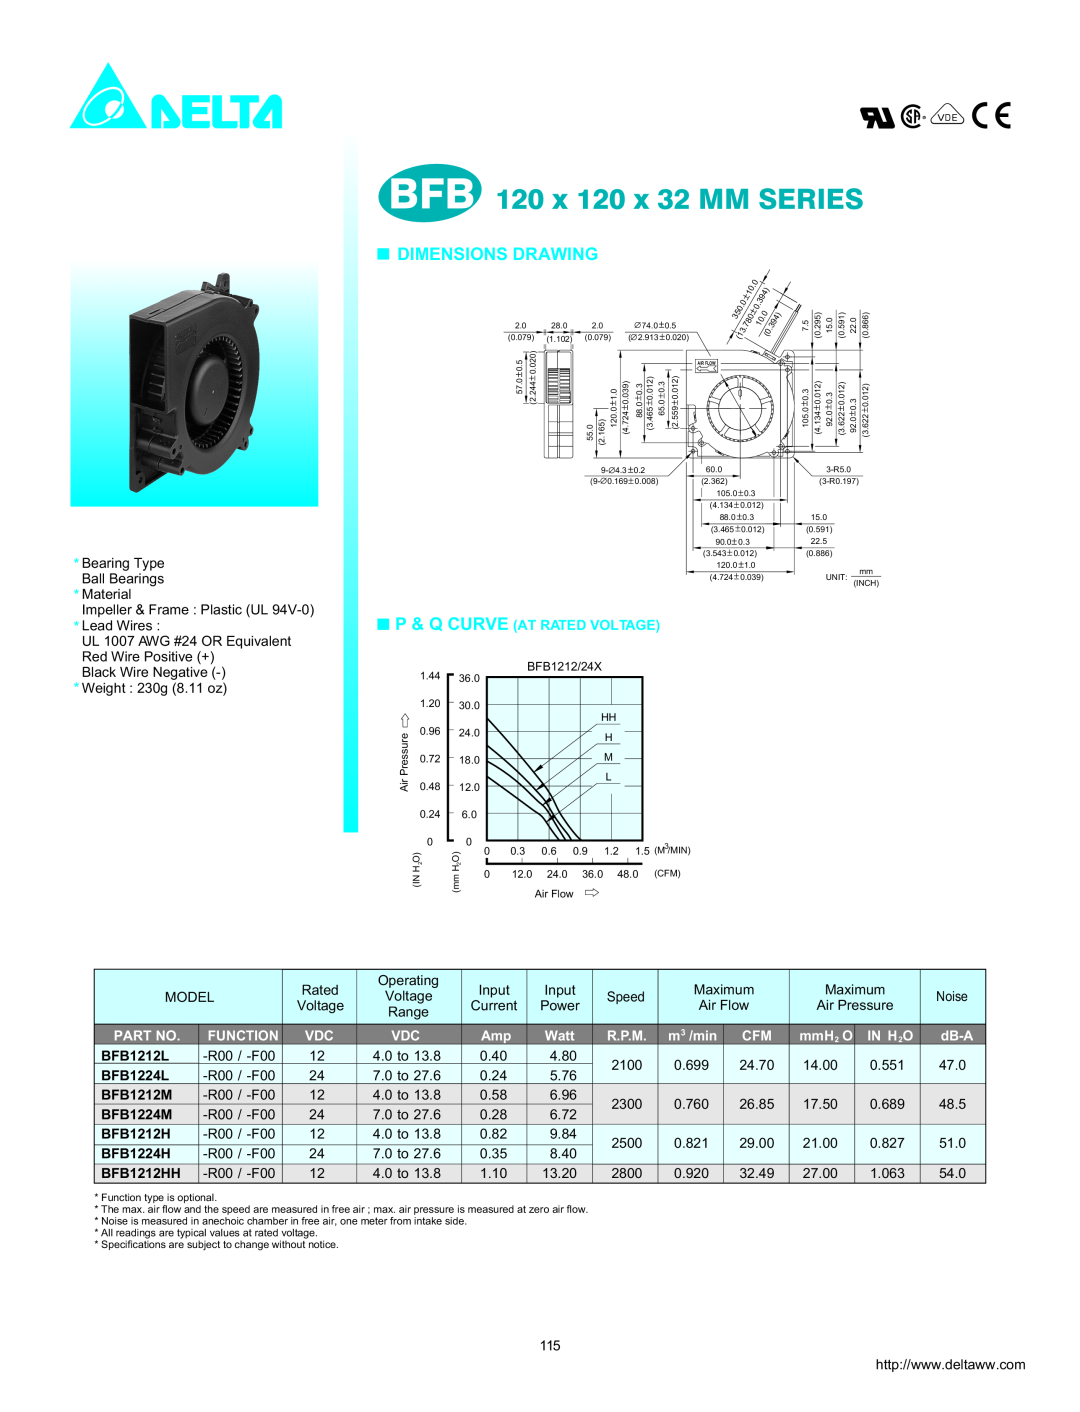 Delta Electronics BFB1212M dimensions BFB 120 x 120 x 32 MM SERIES, Dimensions Drawing, P & Q Curve At Rated Voltage, dB-A 